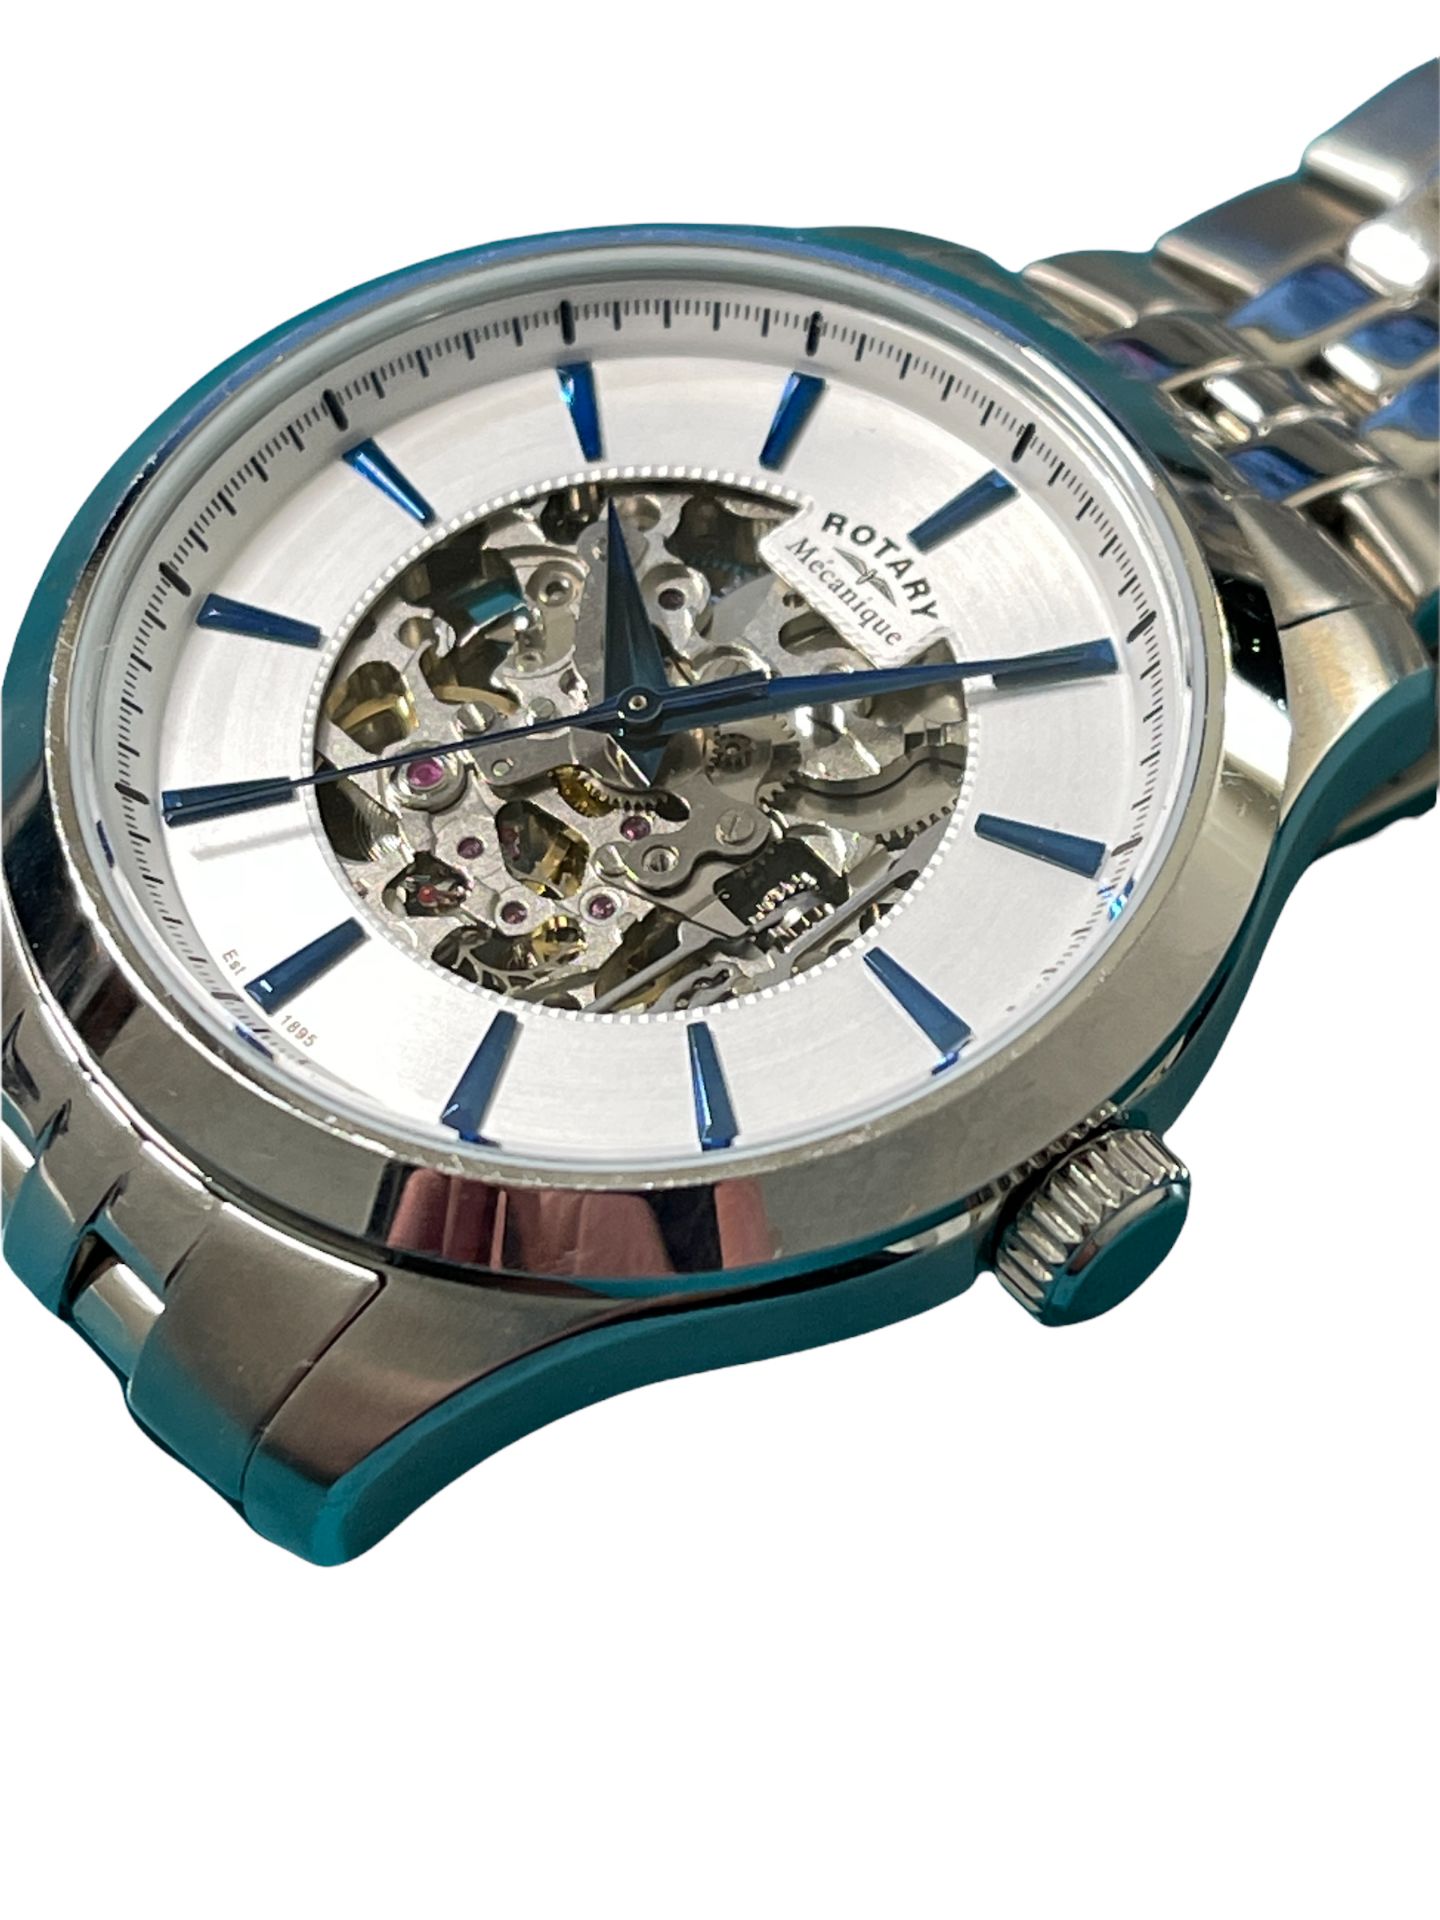 R29 Rotary automatic Skeleton Mans watch - Image 4 of 7